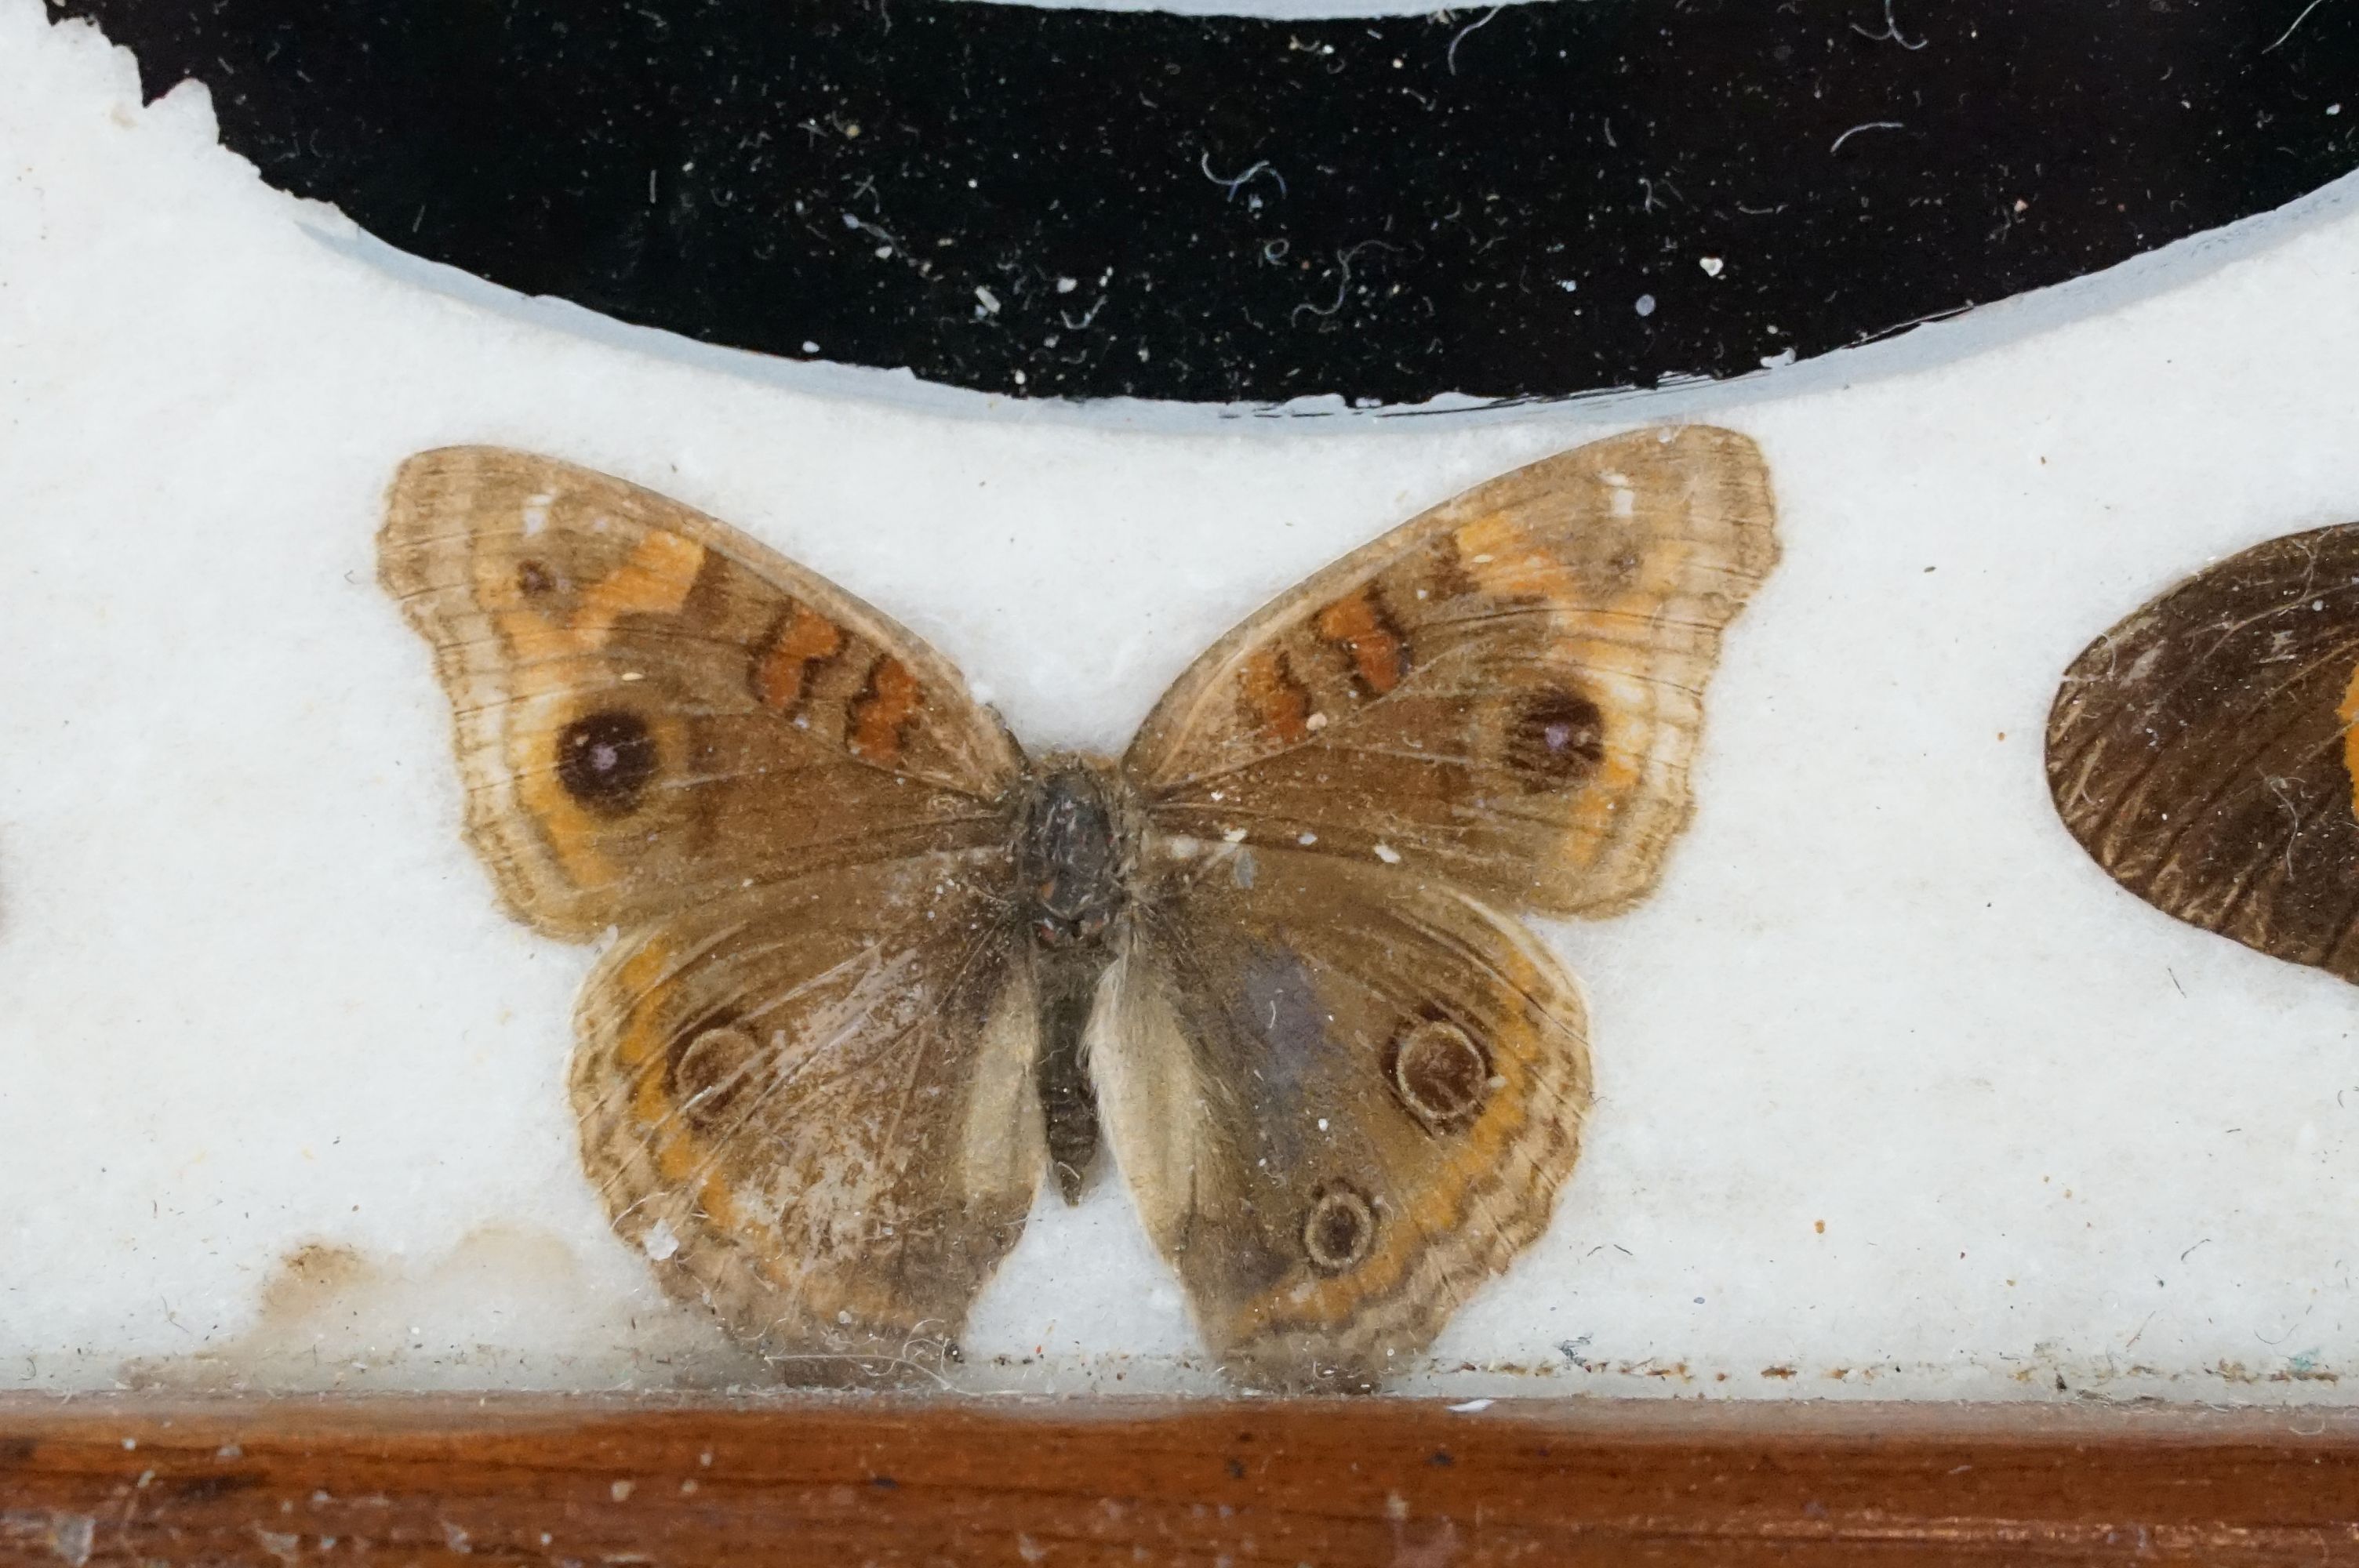 Early 20th century inlaid wooden tray with butterfly specimens and masonic butterfly wing emblem - Image 9 of 11